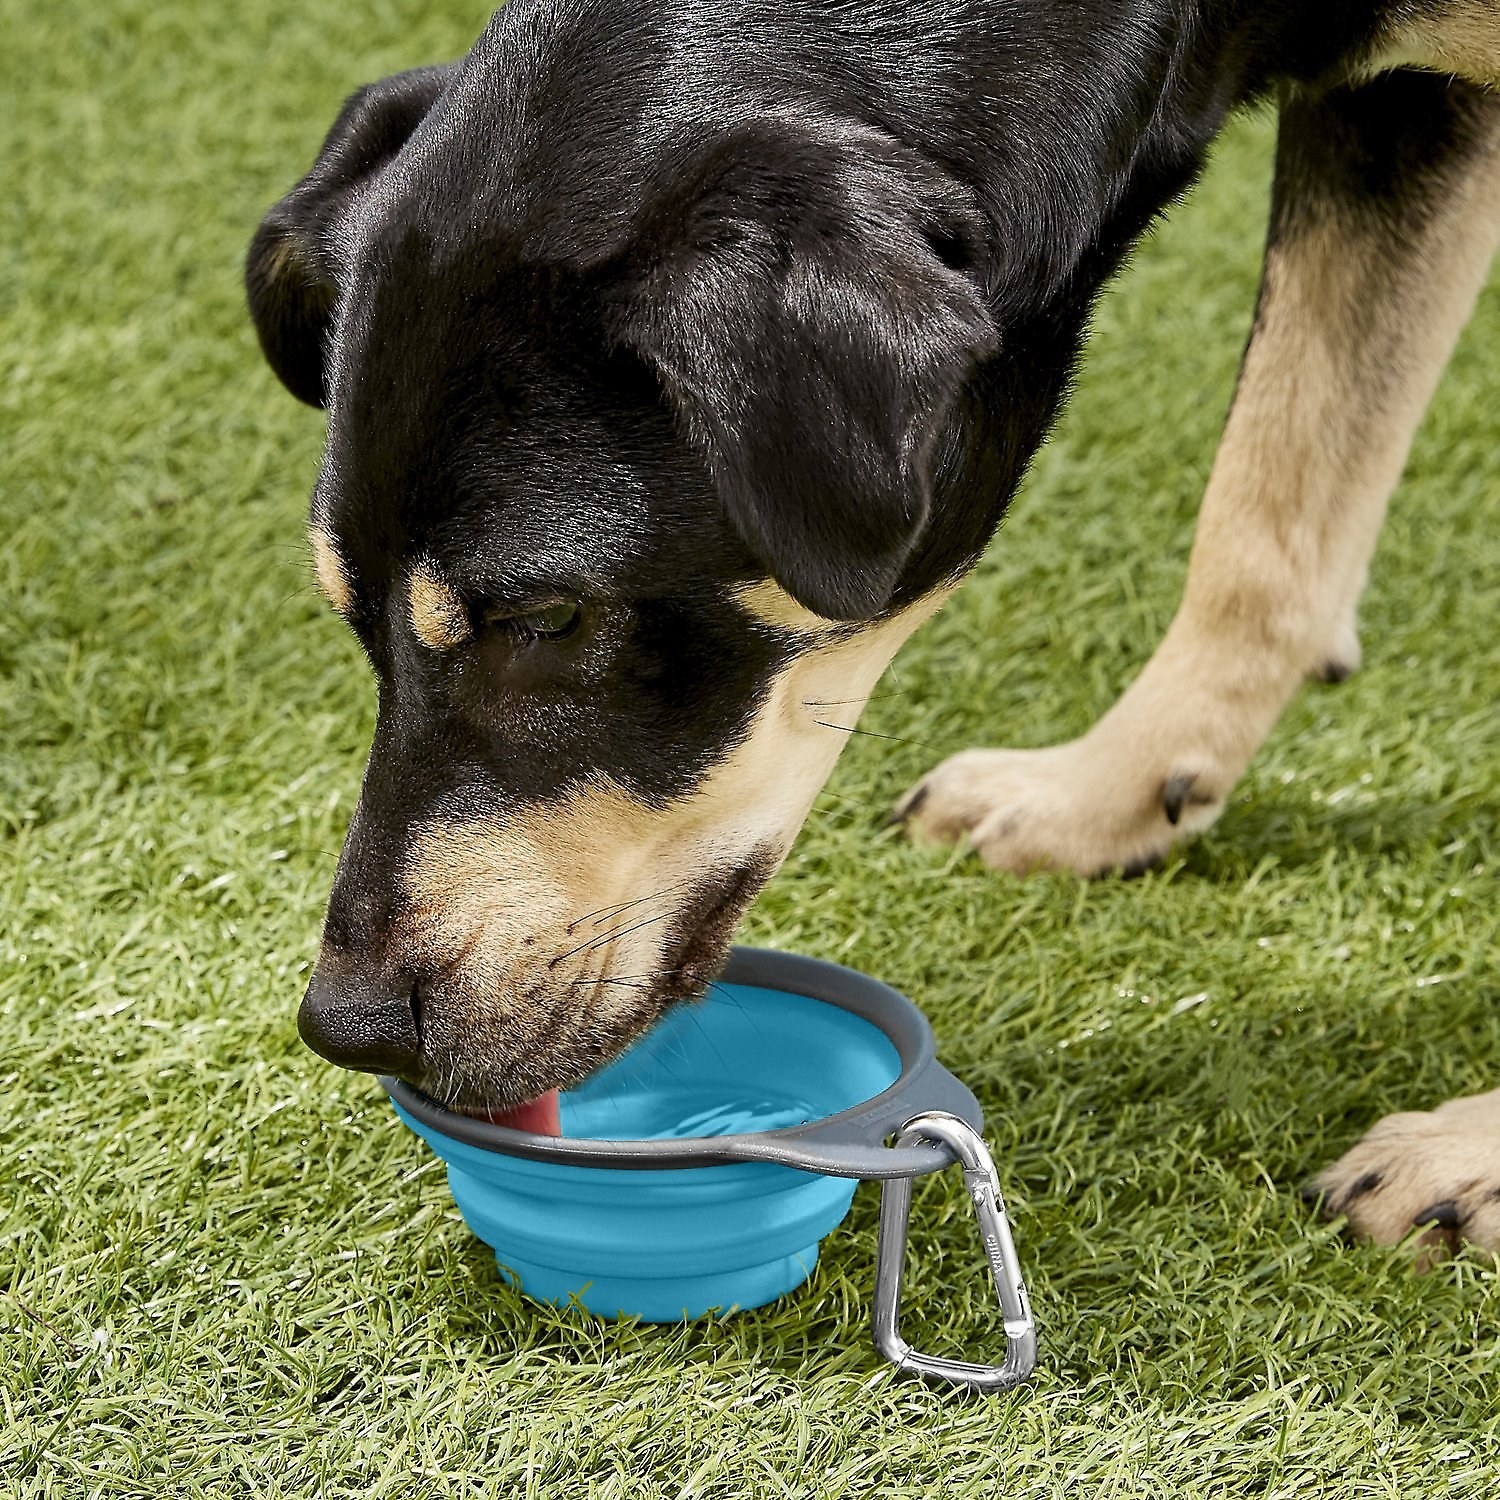 Dog using the blue collapsible silicone portable travel bowl